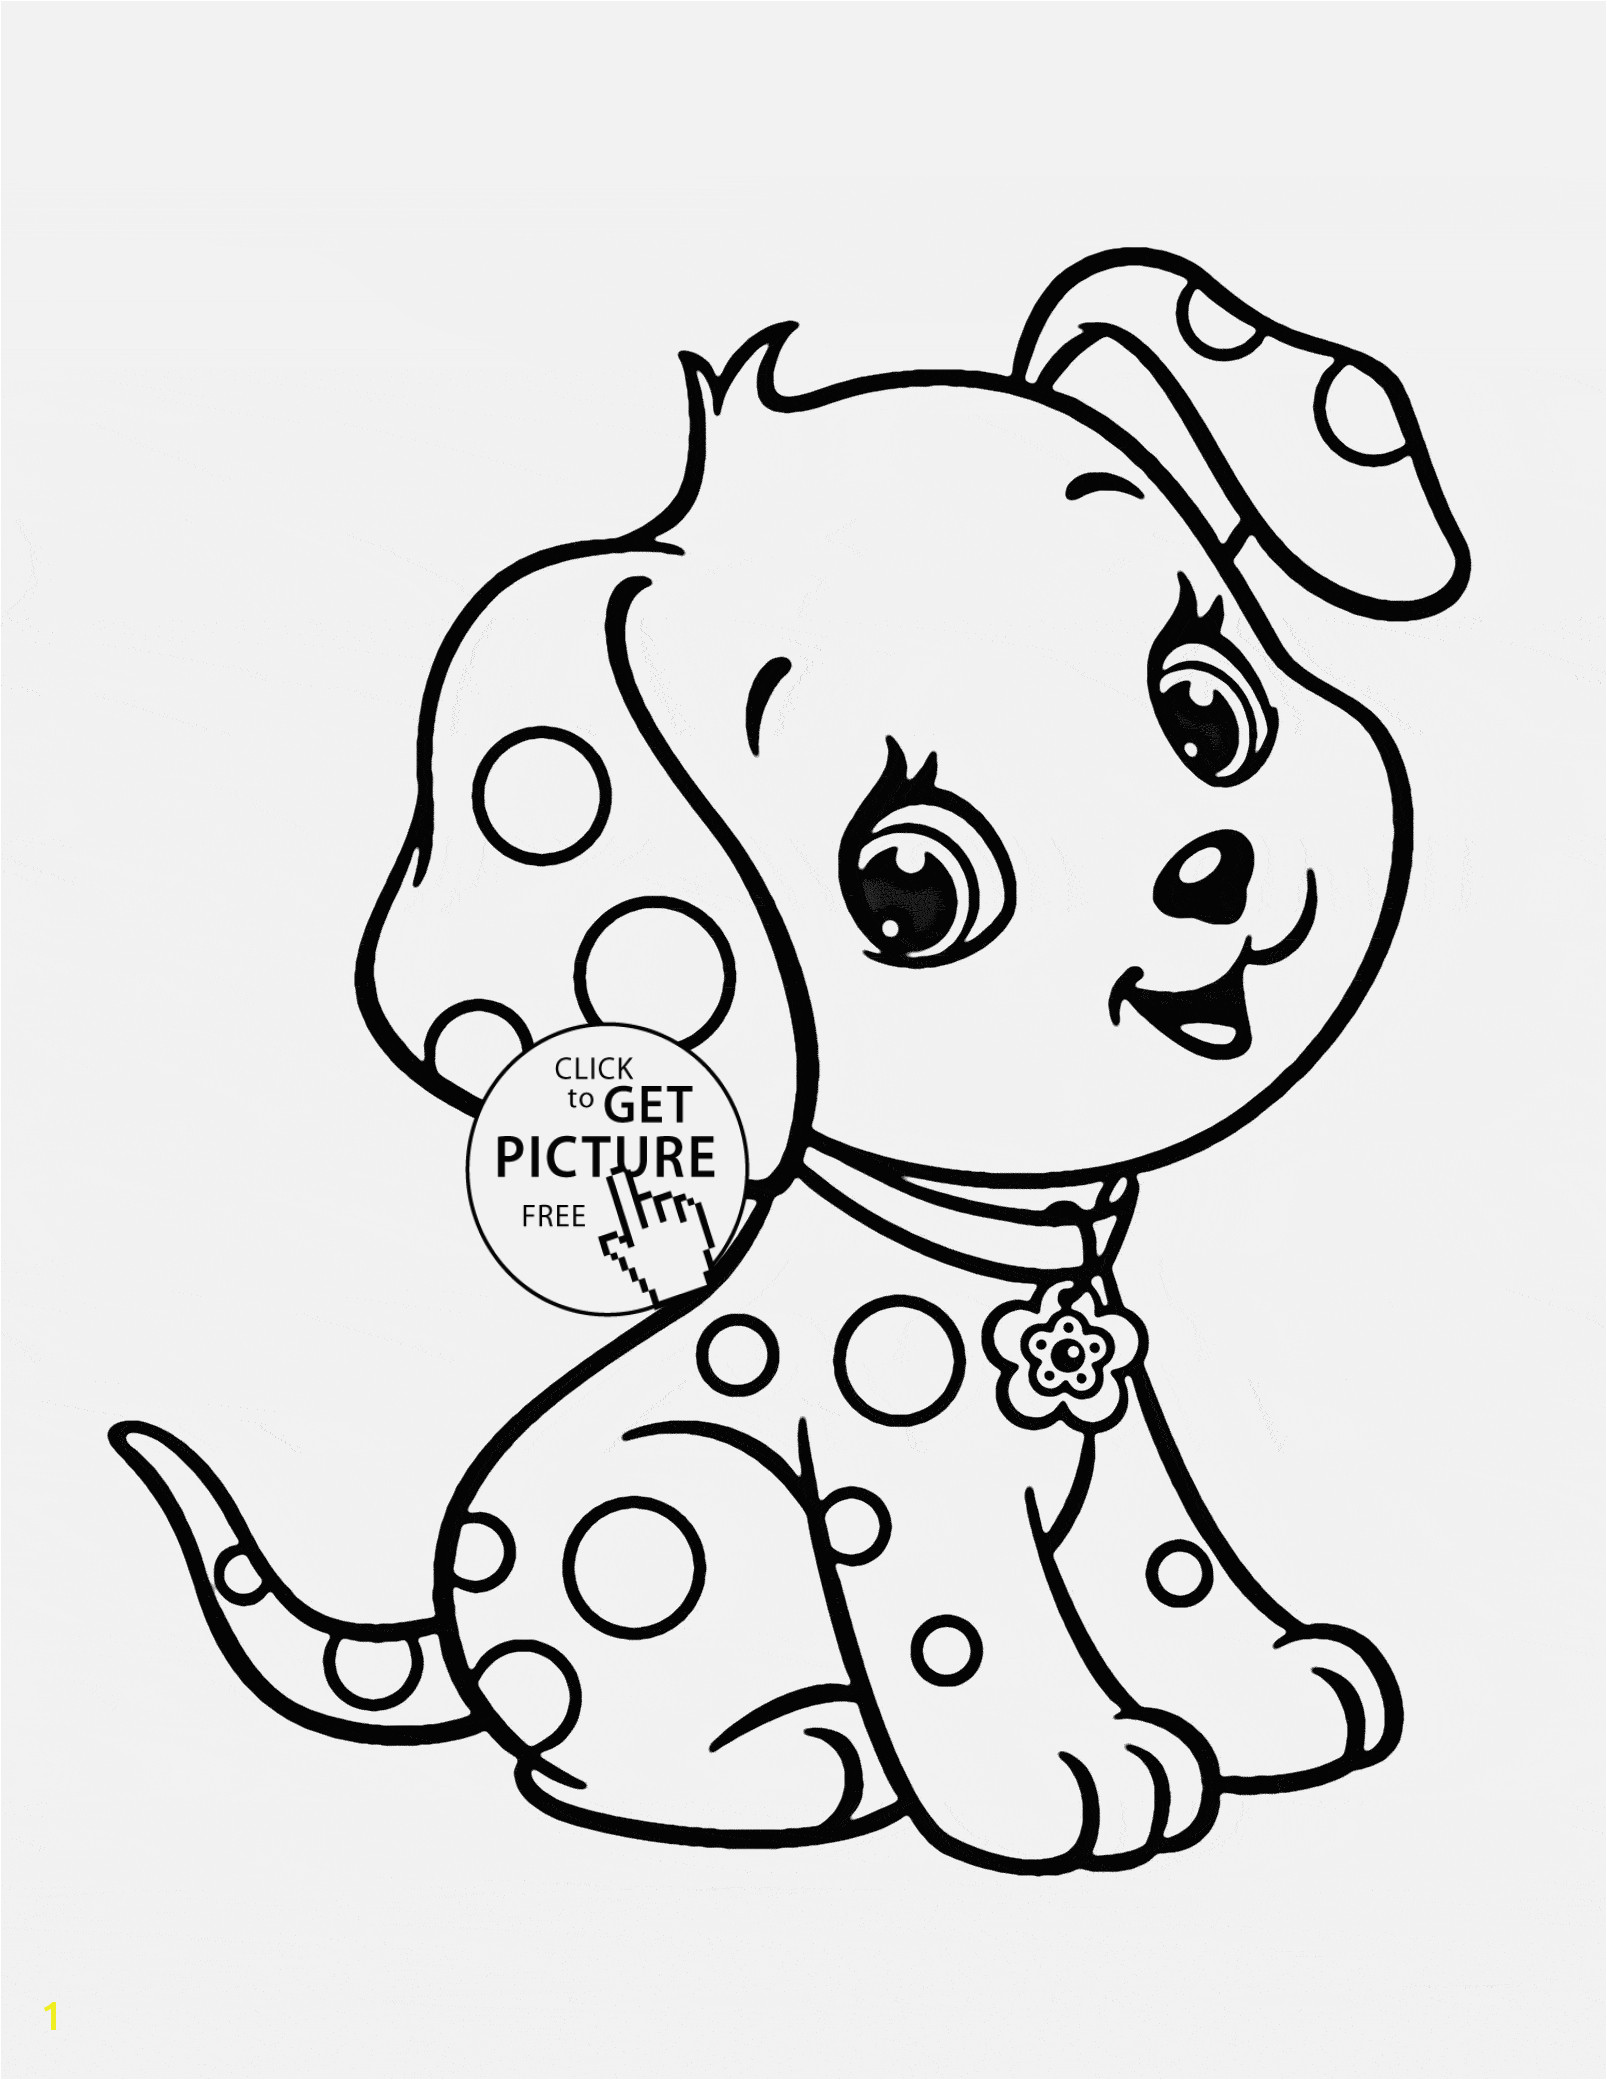 Crayola Photo to Coloring Page Free Animal Coloring Pages Free Print Cool Coloring Page Unique